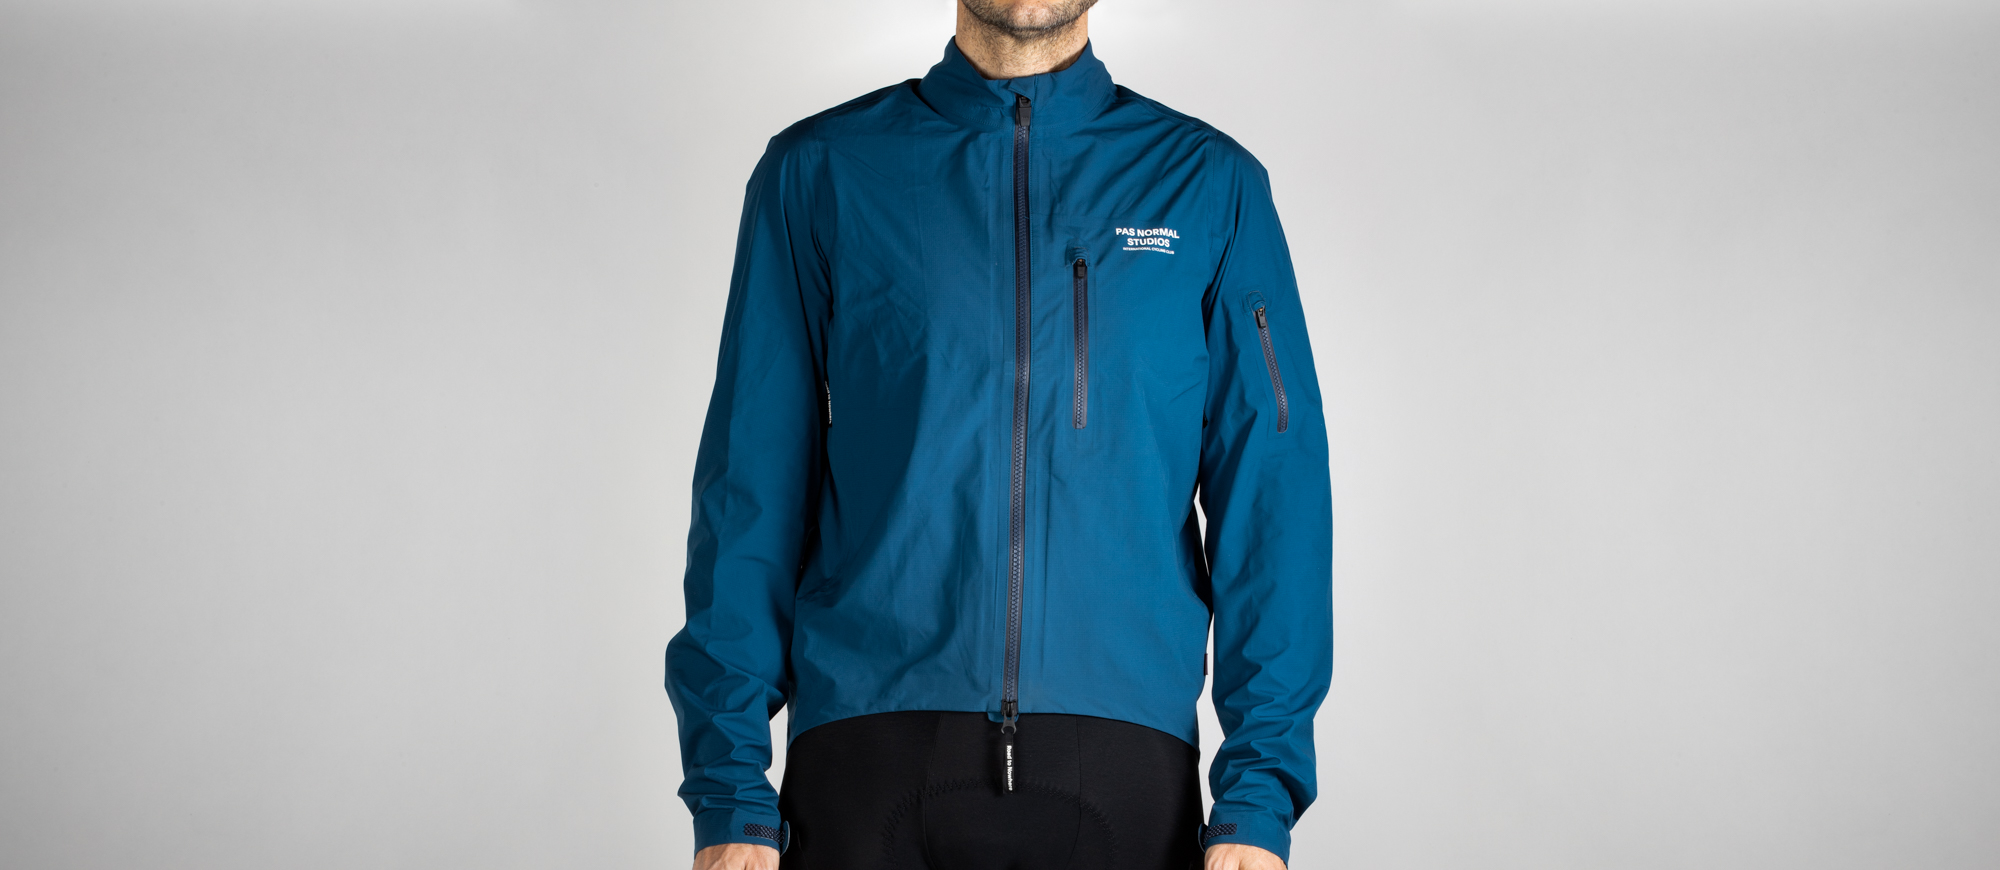 PAS Normal Essential Shield Jacket review: My savior in an atmospheric  river